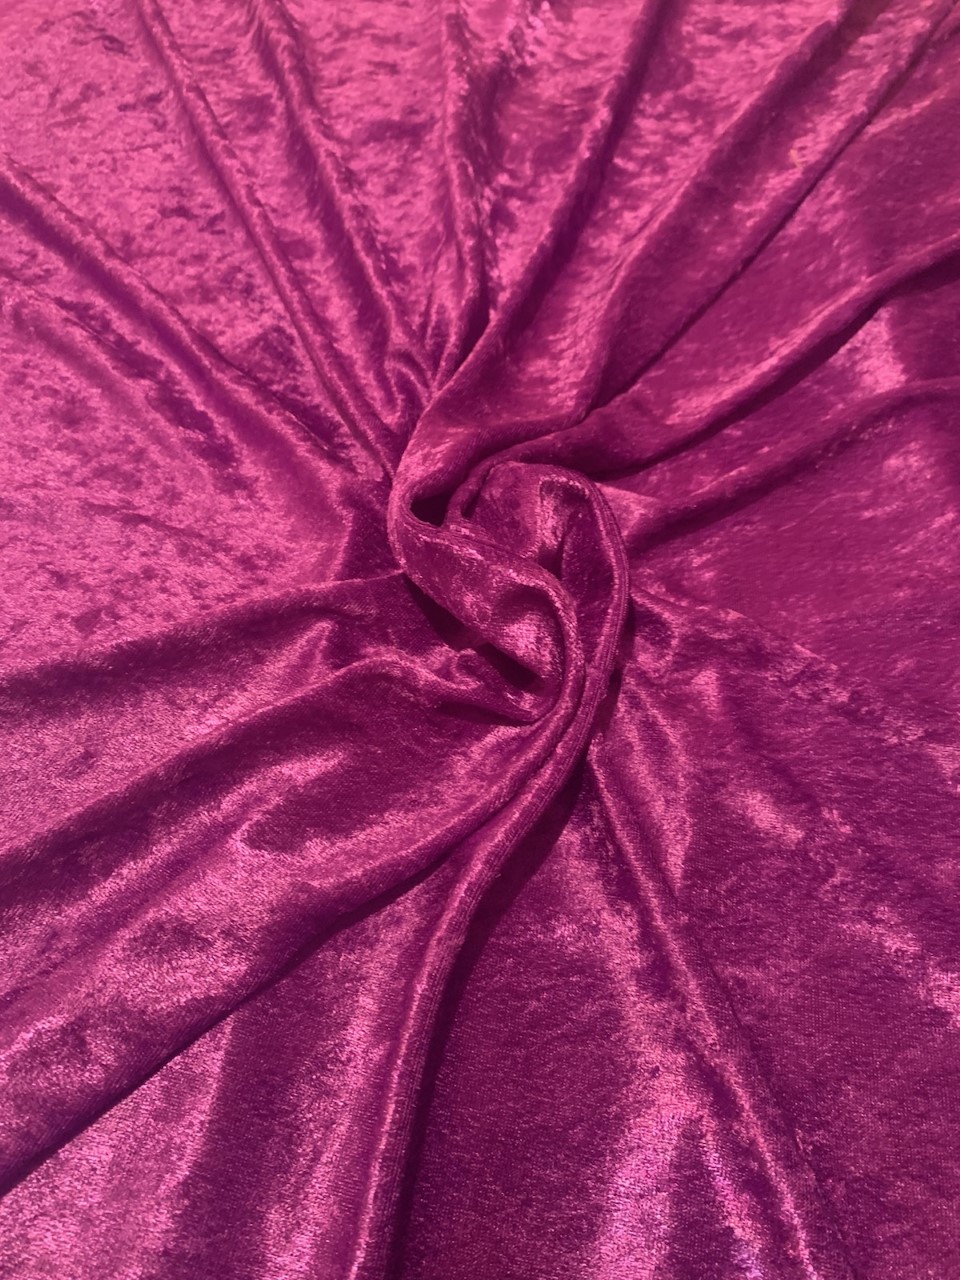 Stretch Velvet Fabric 16 WINE  58 Wide  Sold by the yard